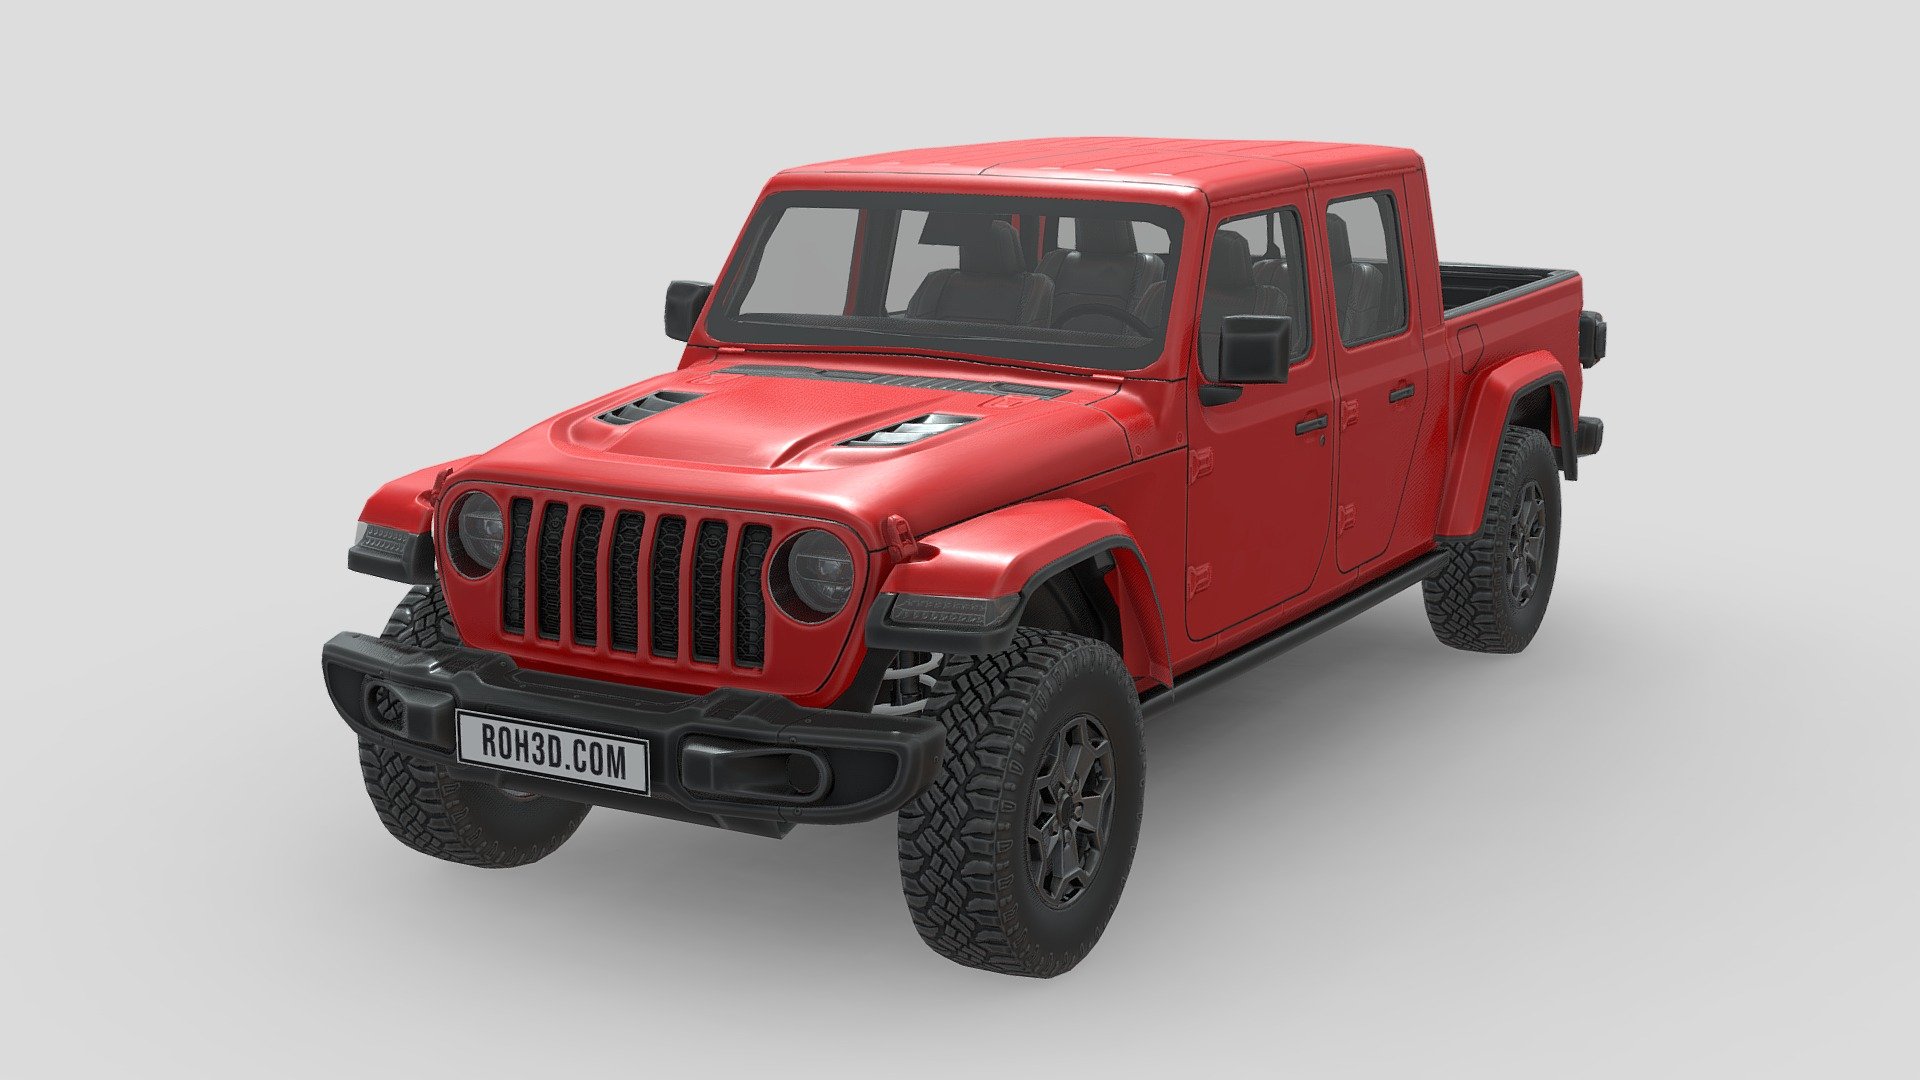 Low Poly Jeep Gladiator Pickup, clean geometry with only 15K polys. It also included PSD files, so you can easily change the color.

The Jeep Gladiator is a midsize pickup truck manufactured by the Jeep division of Stellantis North America (formerly FCA US). It was introduced at the 2018 Los Angeles Auto Show on November 28, 2018, and went on sale in the spring of 2019. Based on the same platform as the Wrangler JL, the Gladiator is Jeep's first pickup truck since the Comanche was discontinued in 1992.

The vehicle's name harkens back to the original Jeep Gladiator, made from 1962 through 1988 and known as the J-Series after 1971. Jeep considered reviving the Gladiator name alongside Comanche and most commonly Scrambler, as well as simply using a new name, before deciding on Gladiator, feeling it fits the truck the best.Low Poly Lamborghini Aventador 2019, clean geometry with only 14K polys. It also included PSD files, so you can easily change the color.

Source: Wikipedia - Low Poly Car - Jeep Gladiator Rubicon 2020 - Buy Royalty Free 3D model by ROH3D 3d model